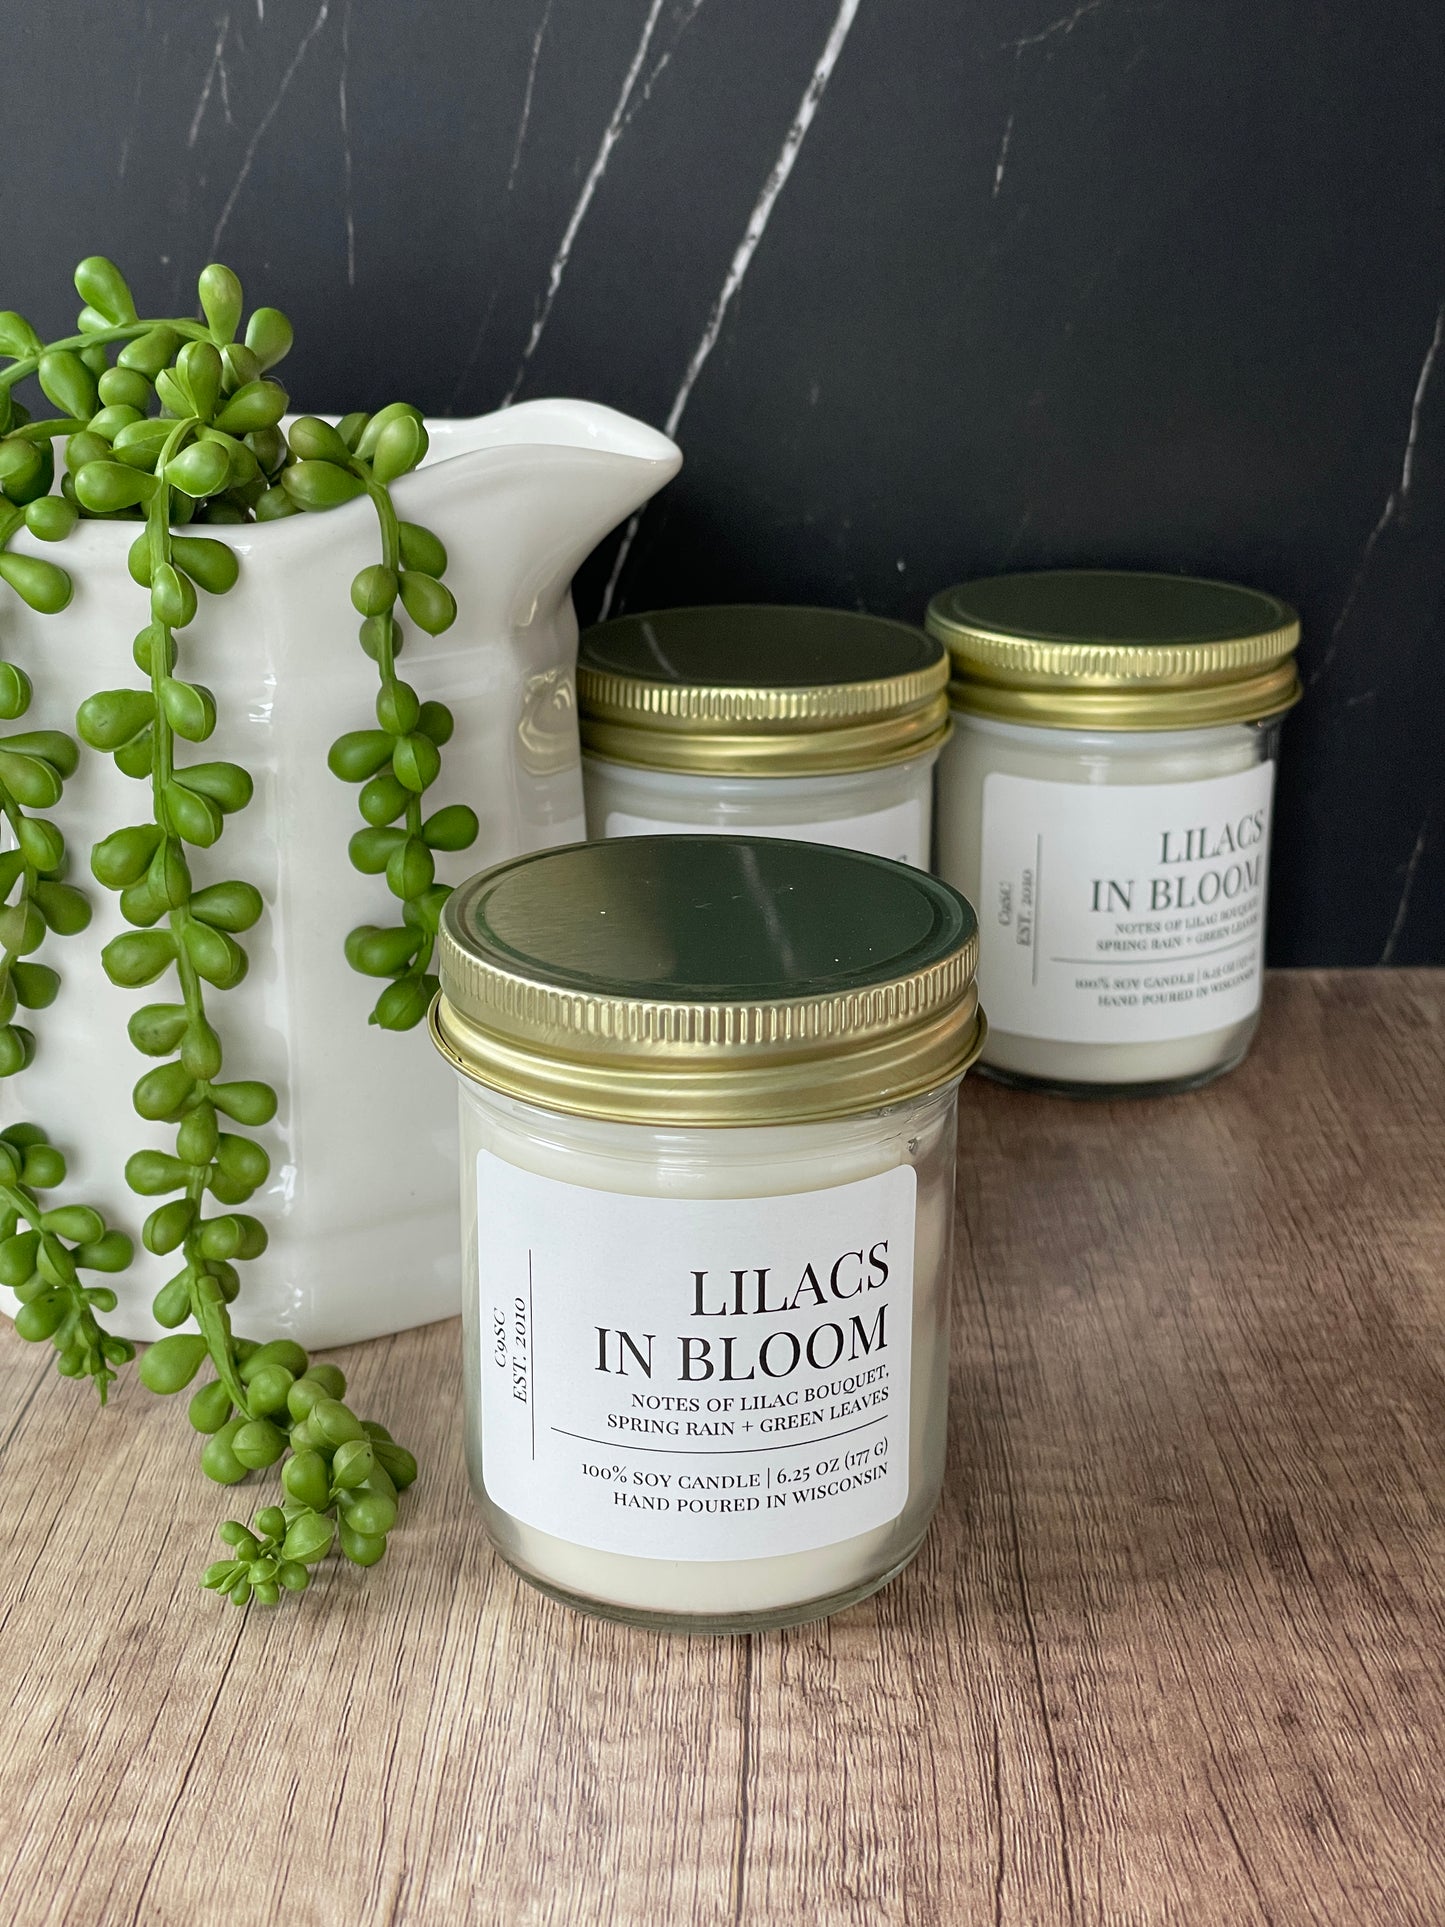 Lilacs In Bloom Soy Candle: Lilacs, Green Leaves